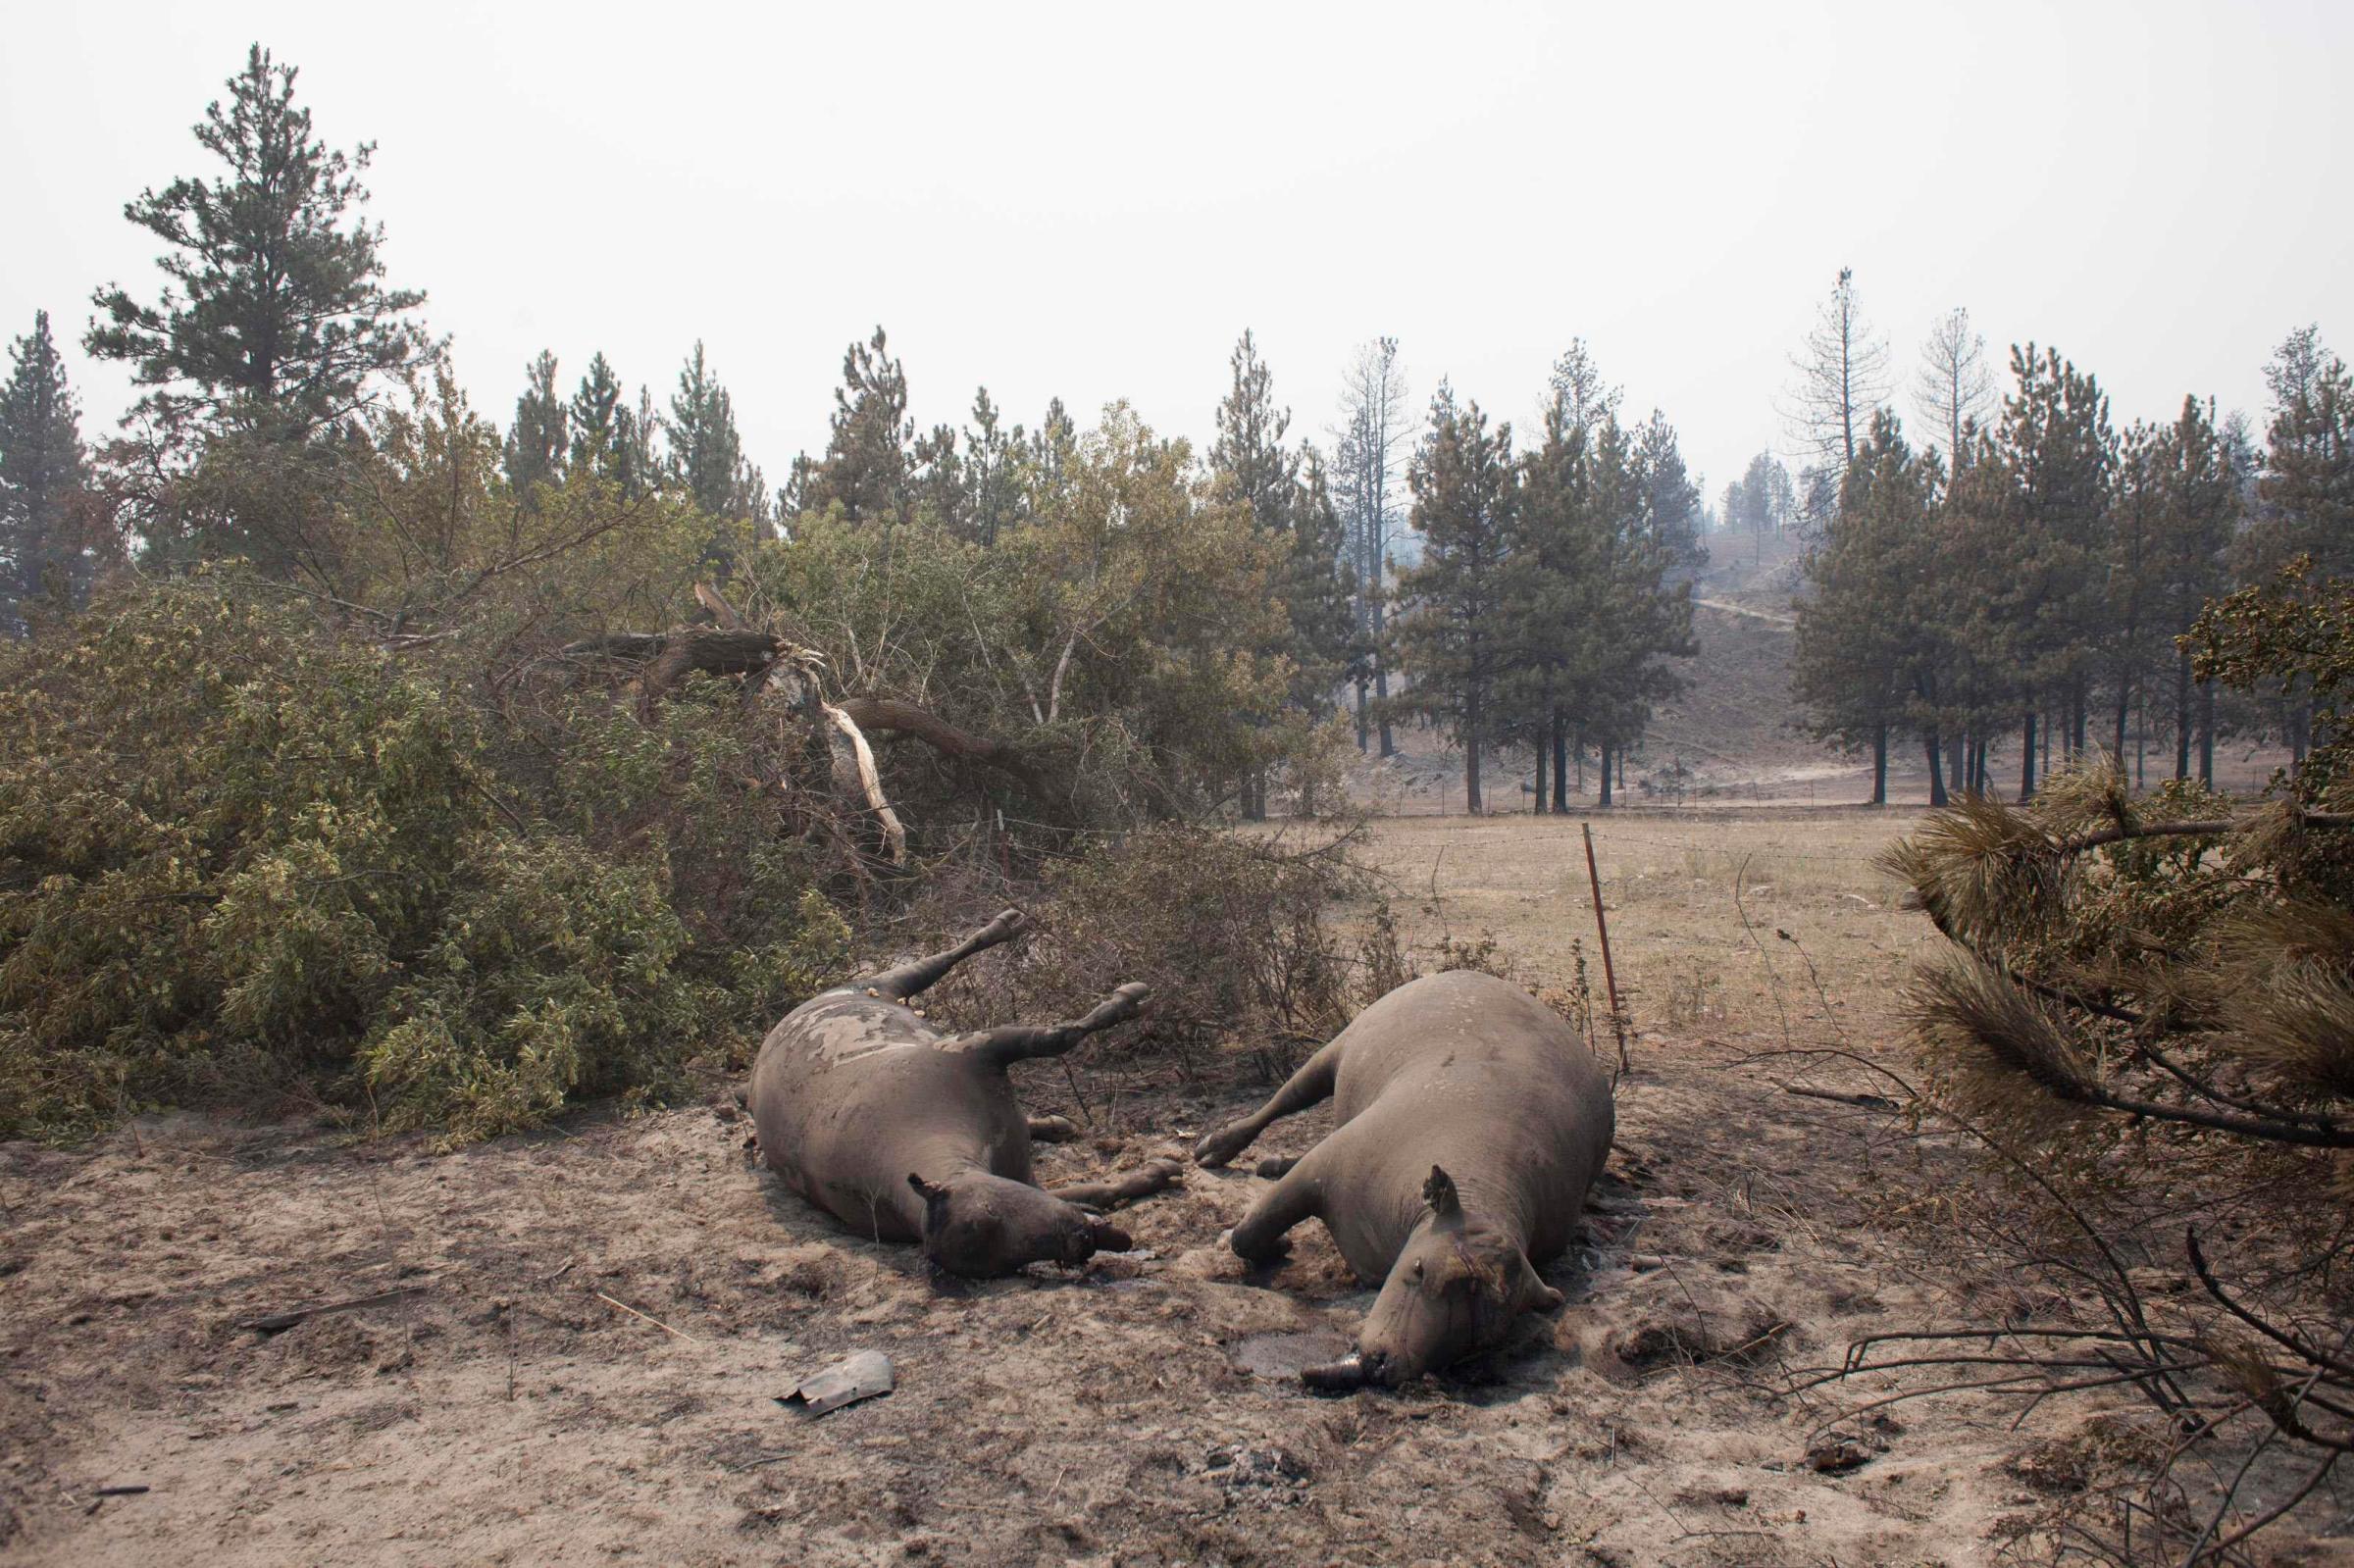 Deceased cattle, which fell victim to the Carlton Complex Fire, are pictured on ranch land near Malott, Washington